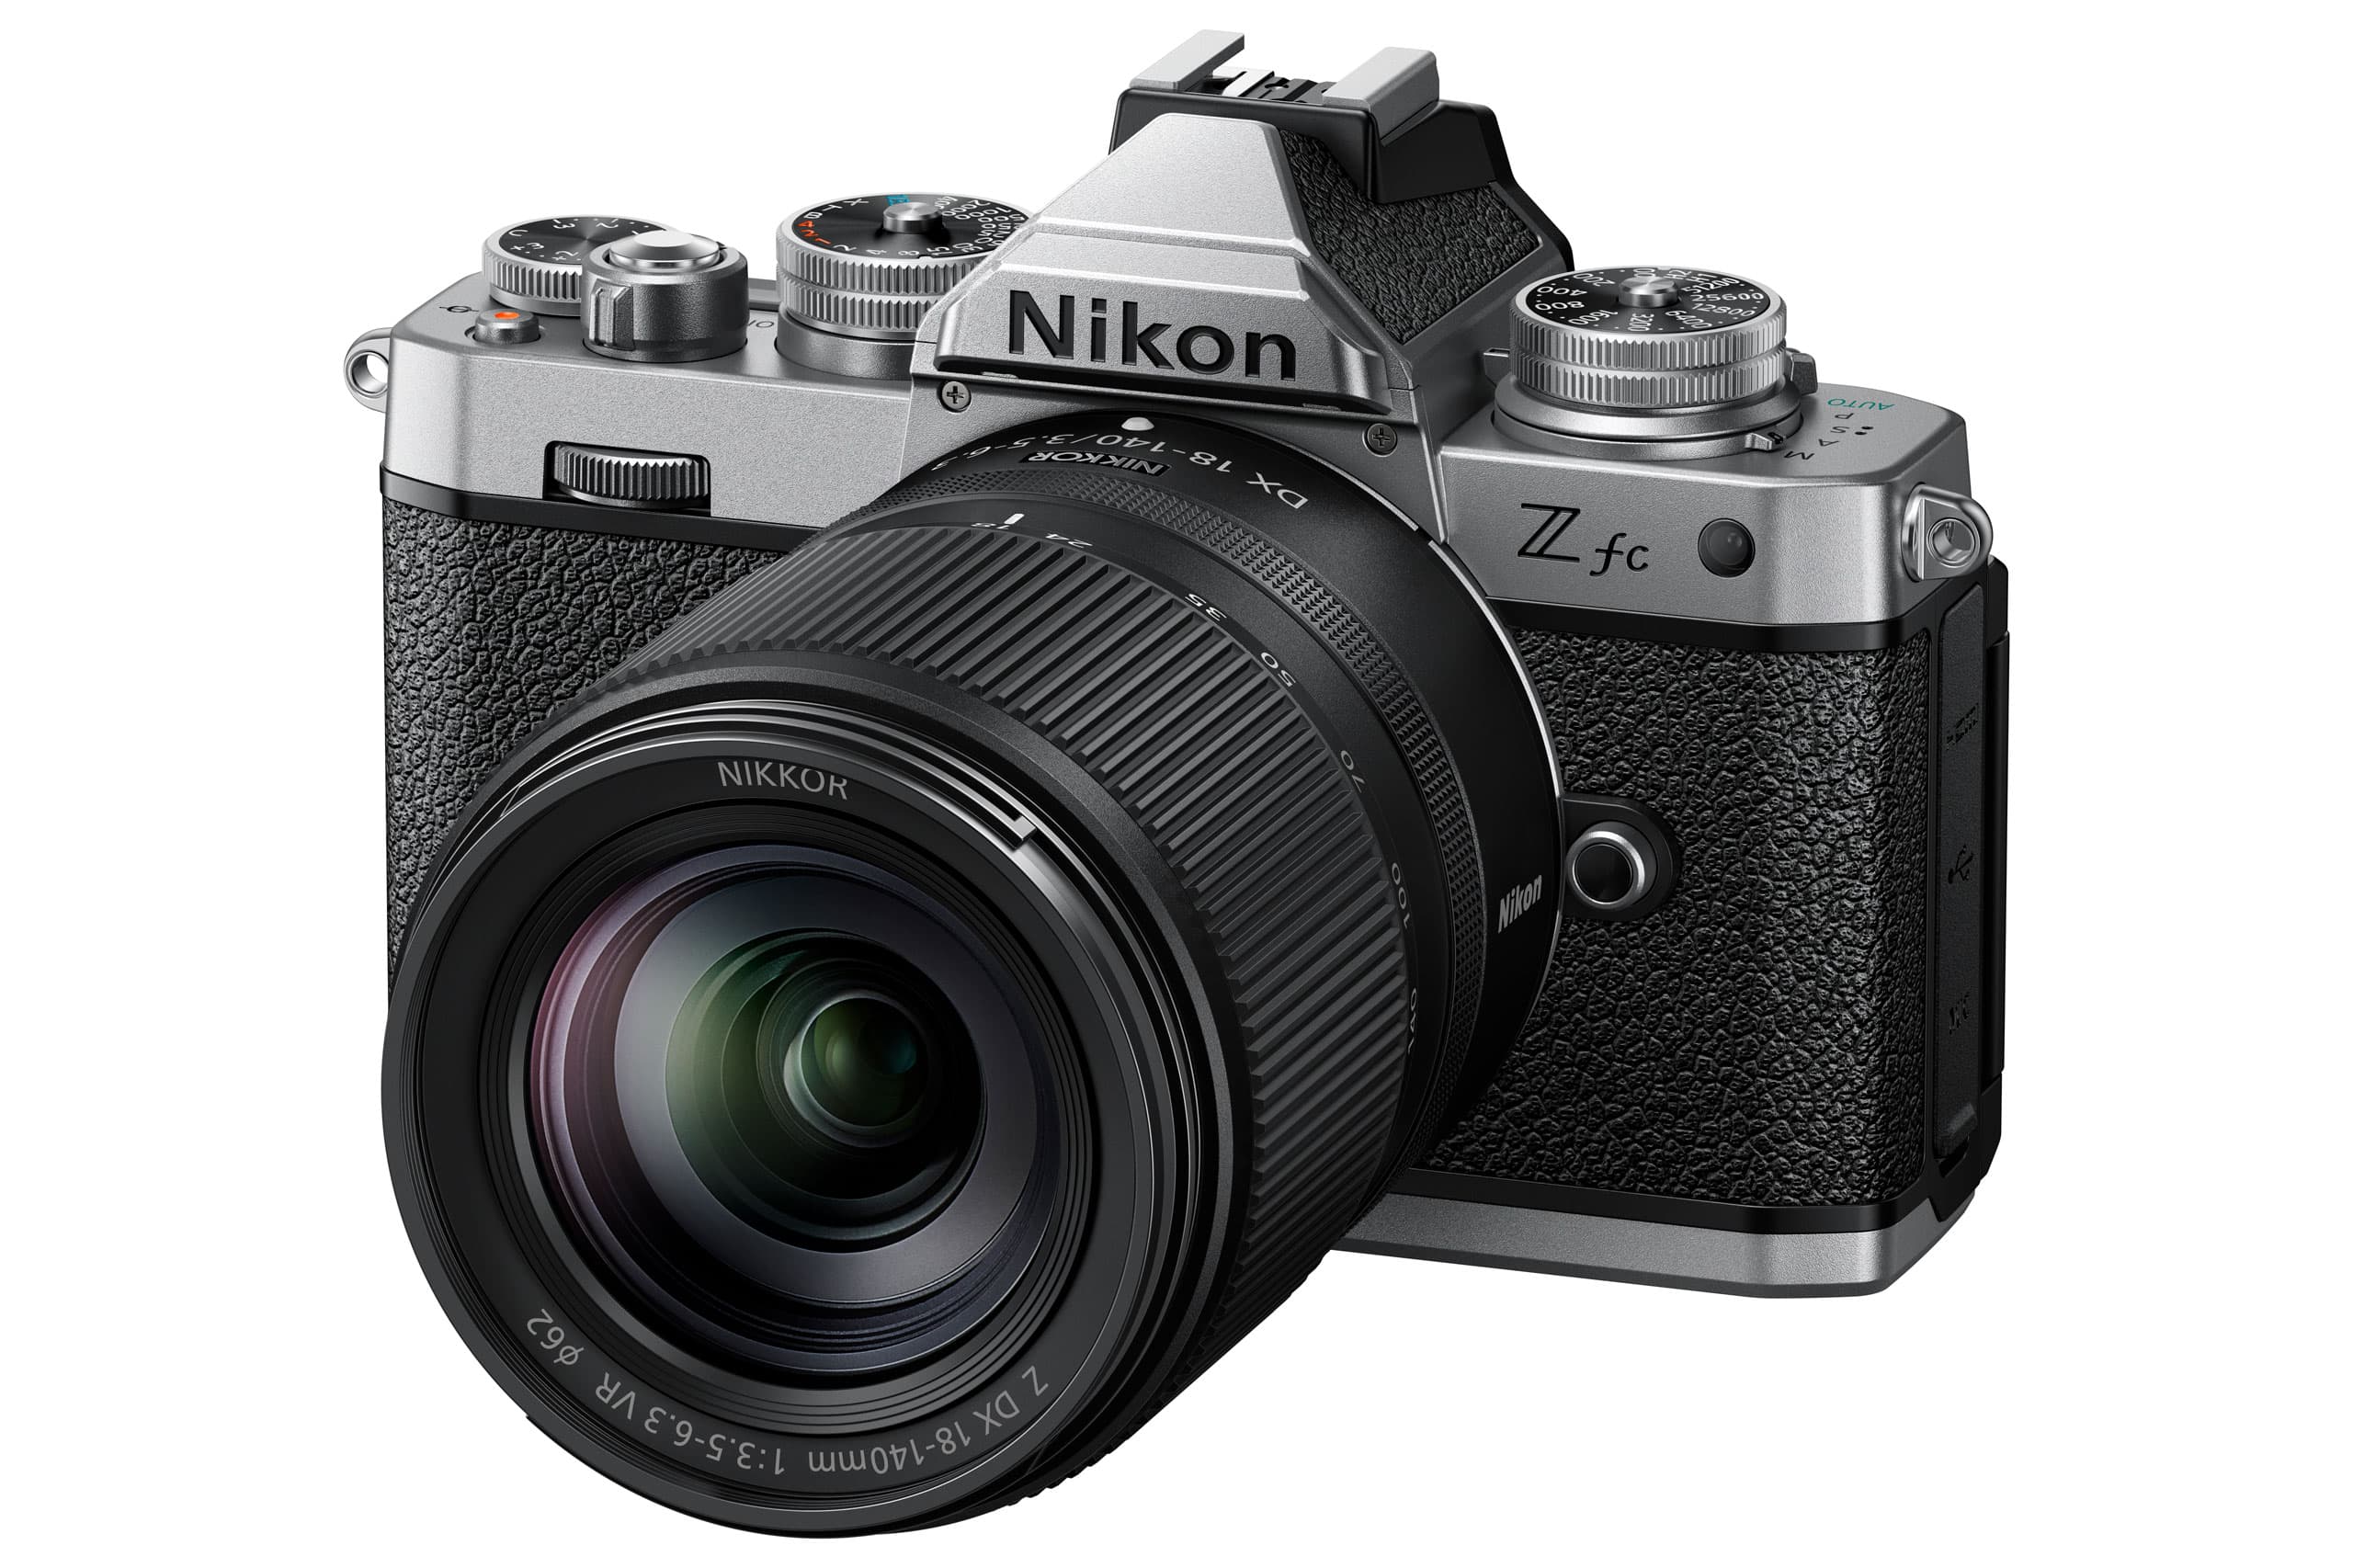 The retro-styled Nikon Z fc has been acknowledged in the Red Dot Product Design awards 